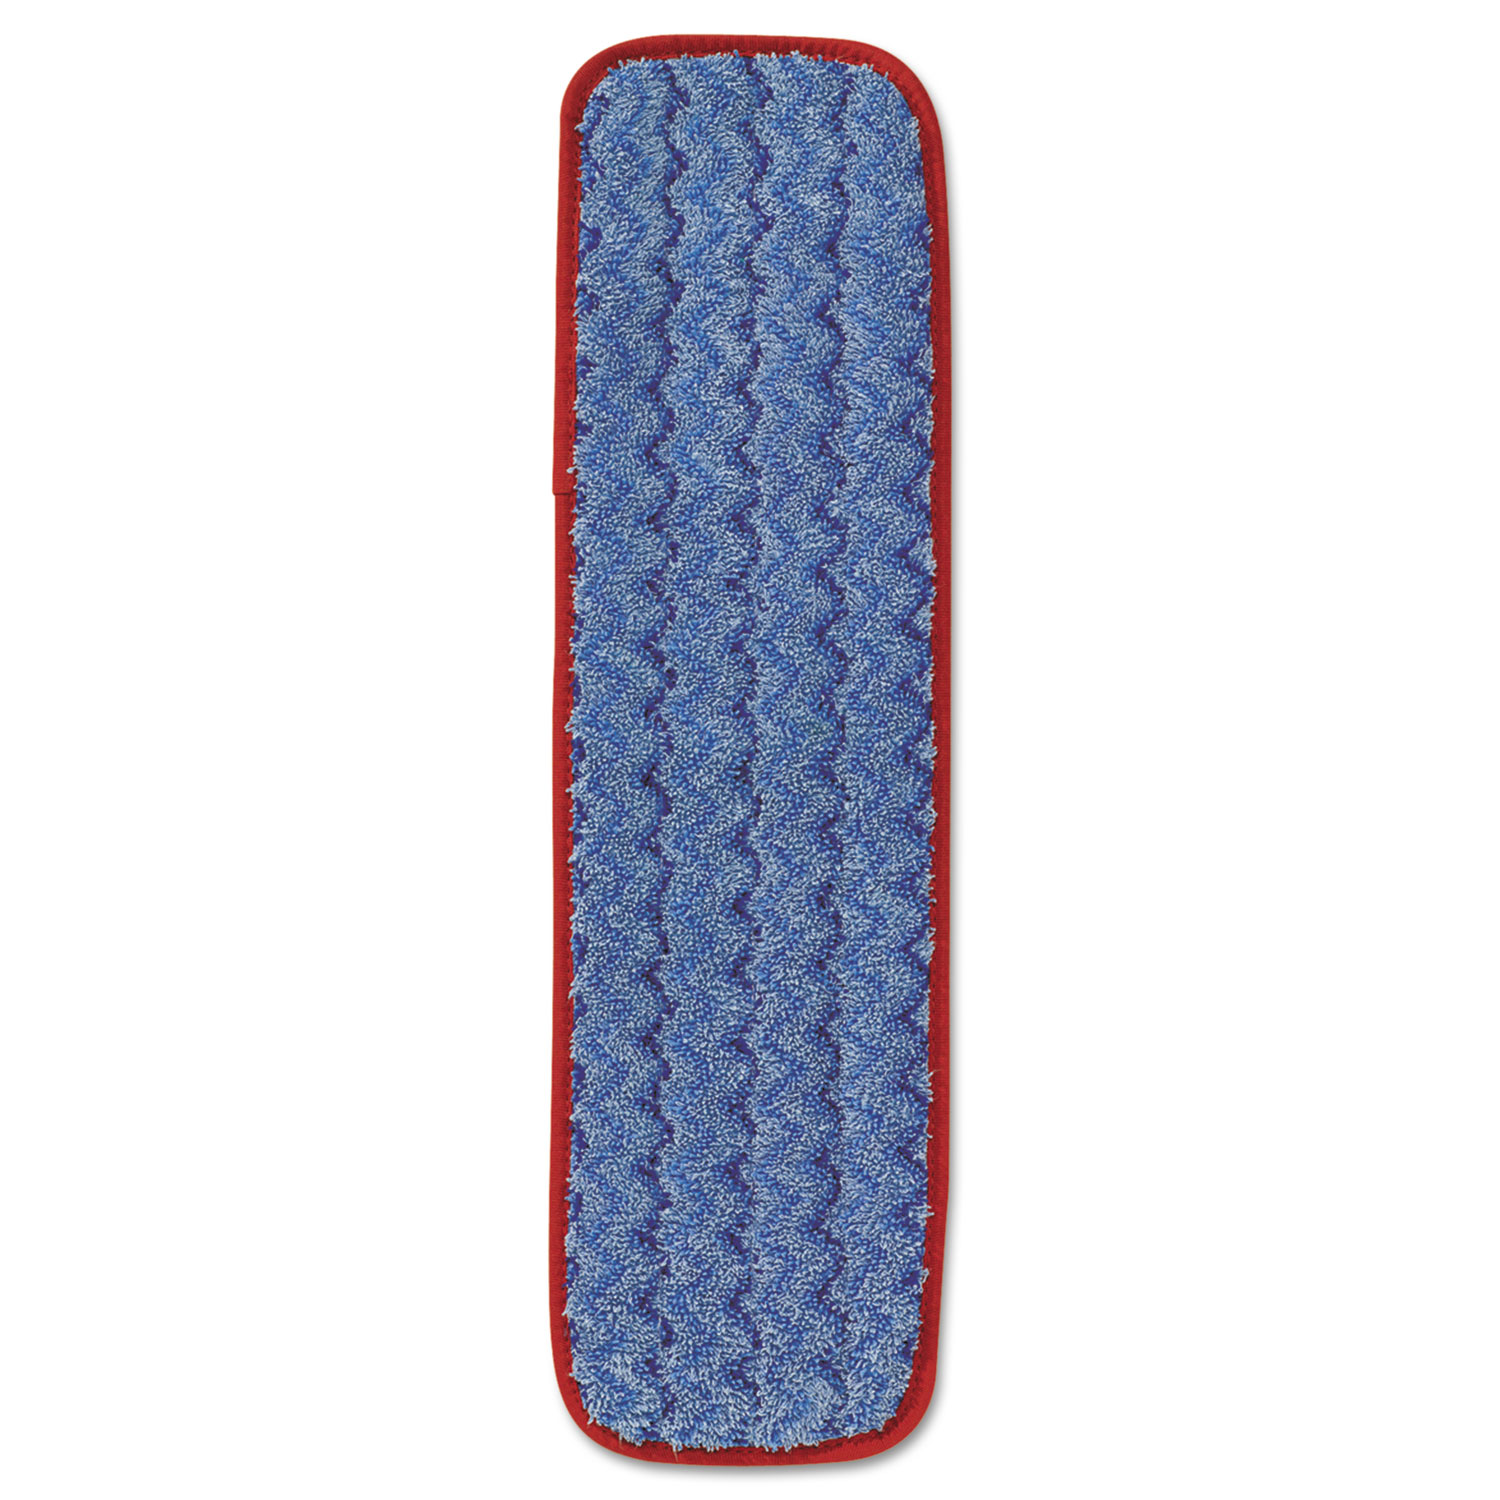  Rubbermaid Commercial FGQ41000RD00 Microfiber Wet Mopping Pad, 18 1/2 x 5 1/2 x 1/2, Red (RCPQ410RED) 